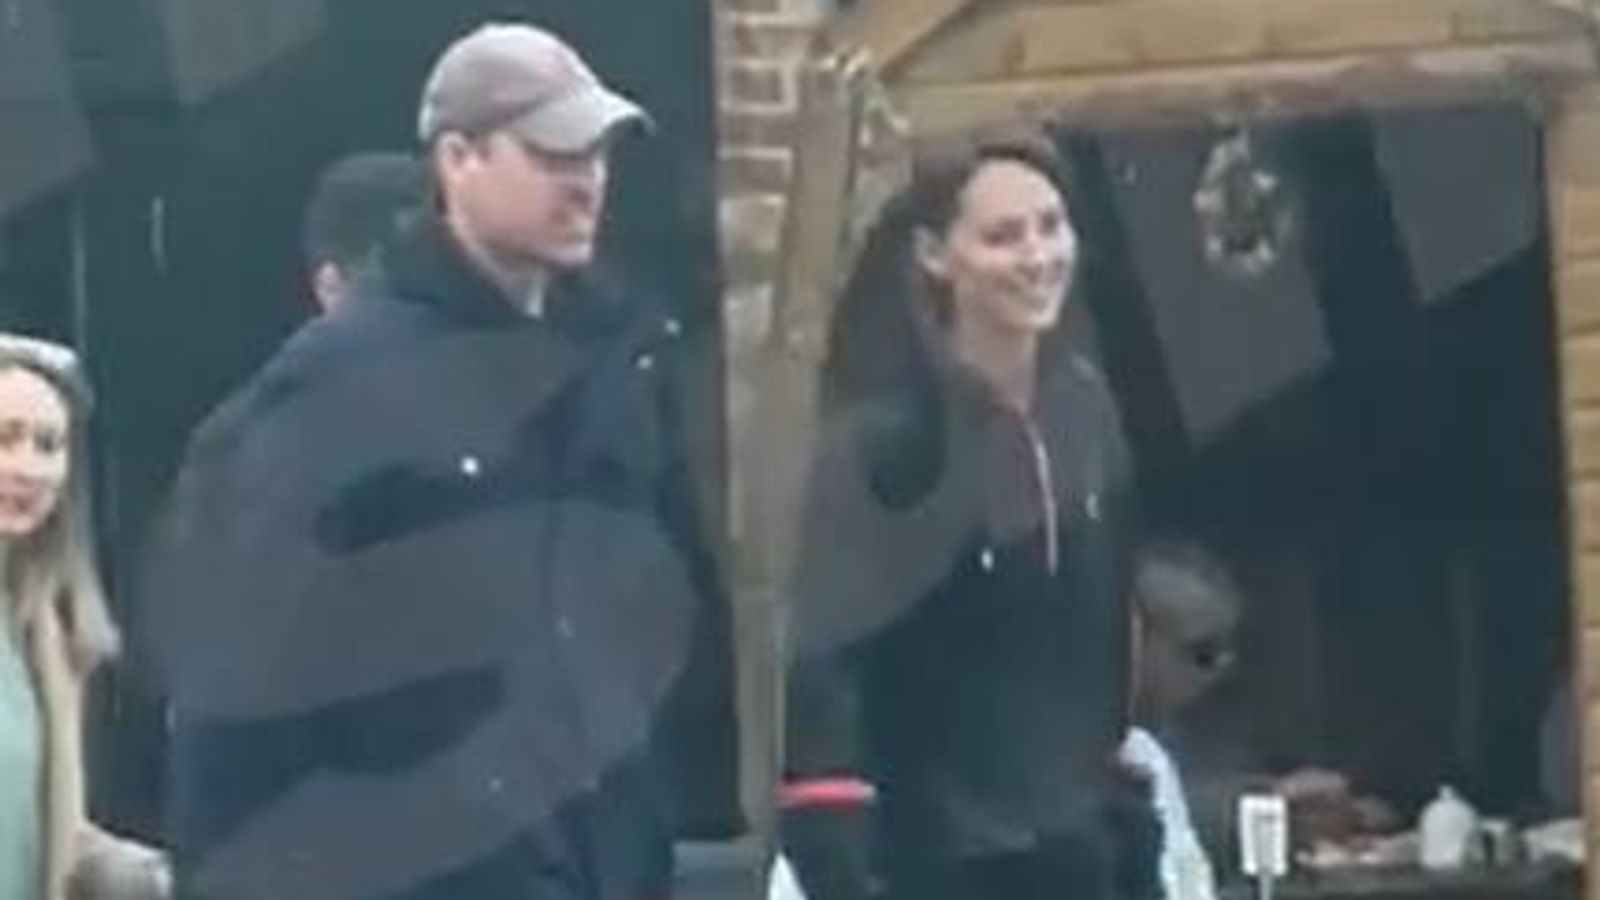 Prince William and Kate Middleton Spotted Shopping Together